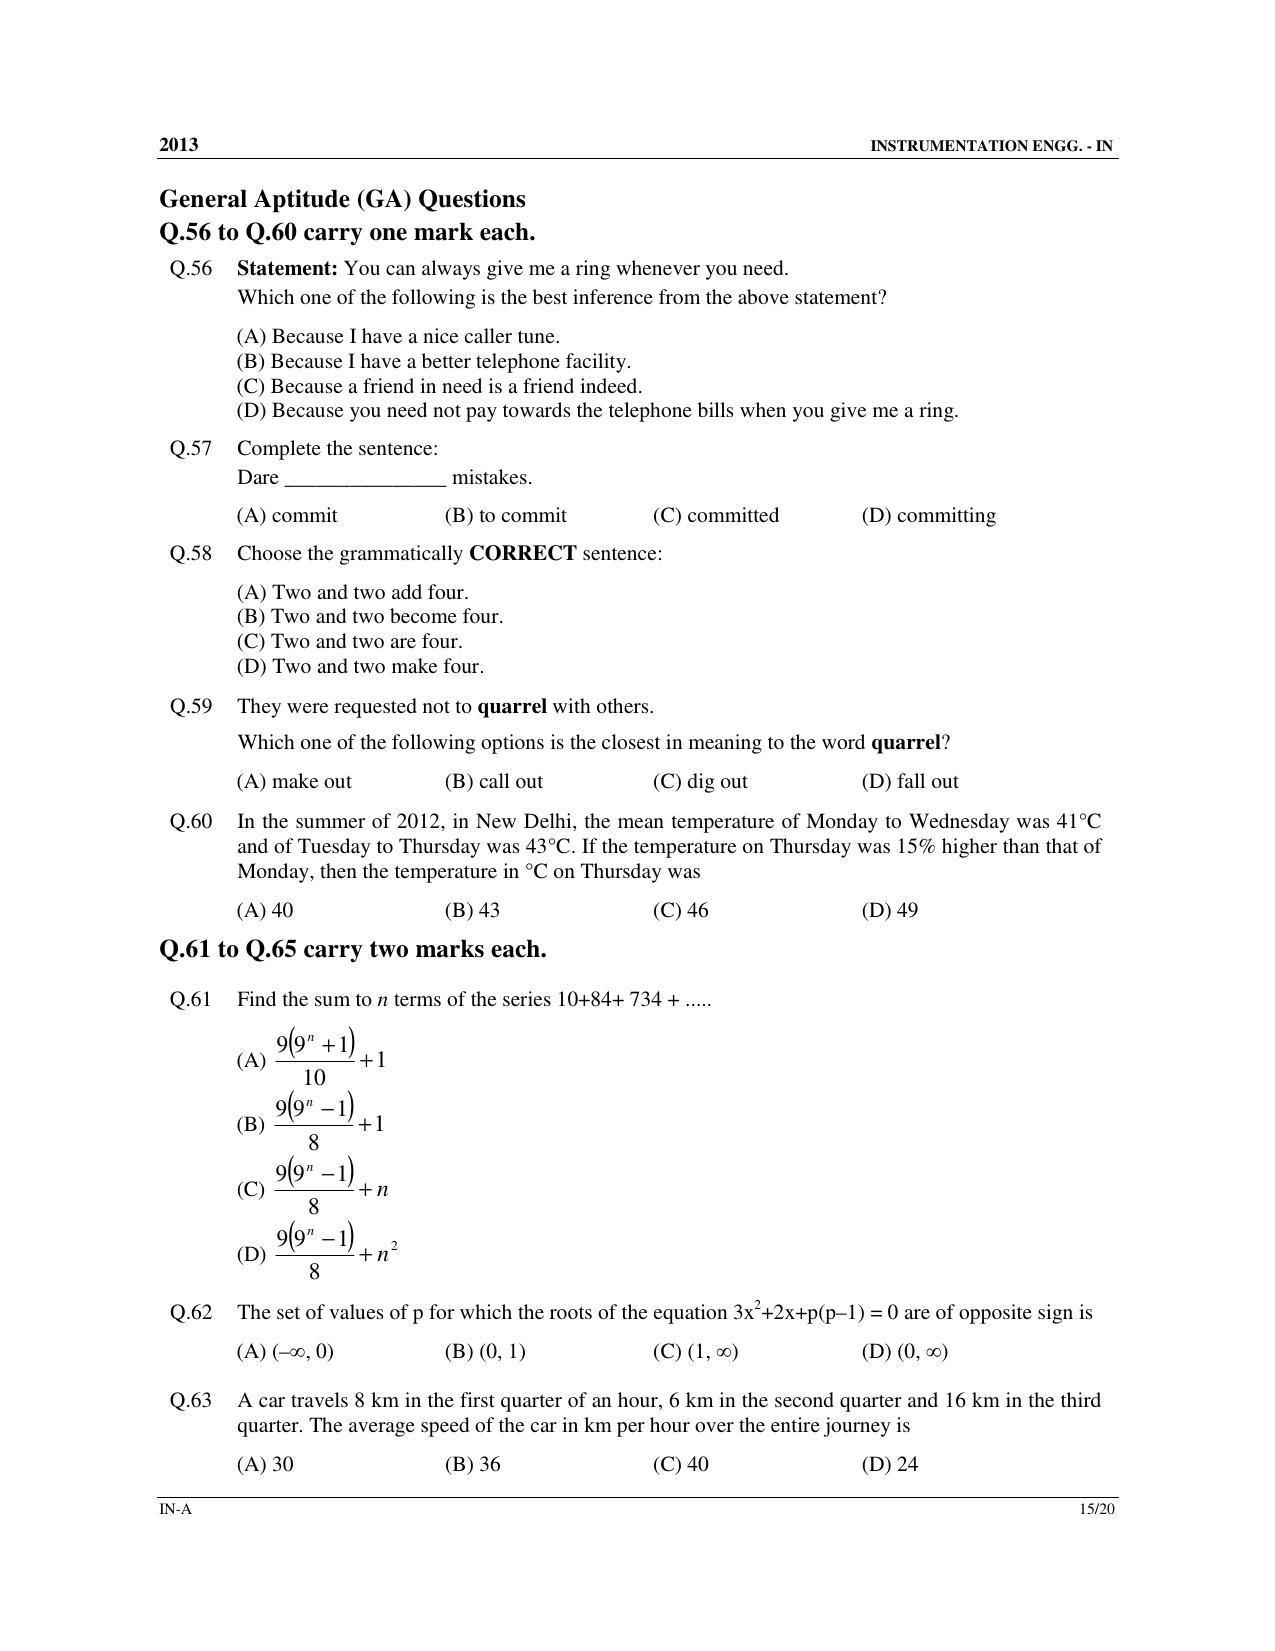 GATE 2013 Instrumentation Engineering (IN) Question Paper with Answer Key - Page 16